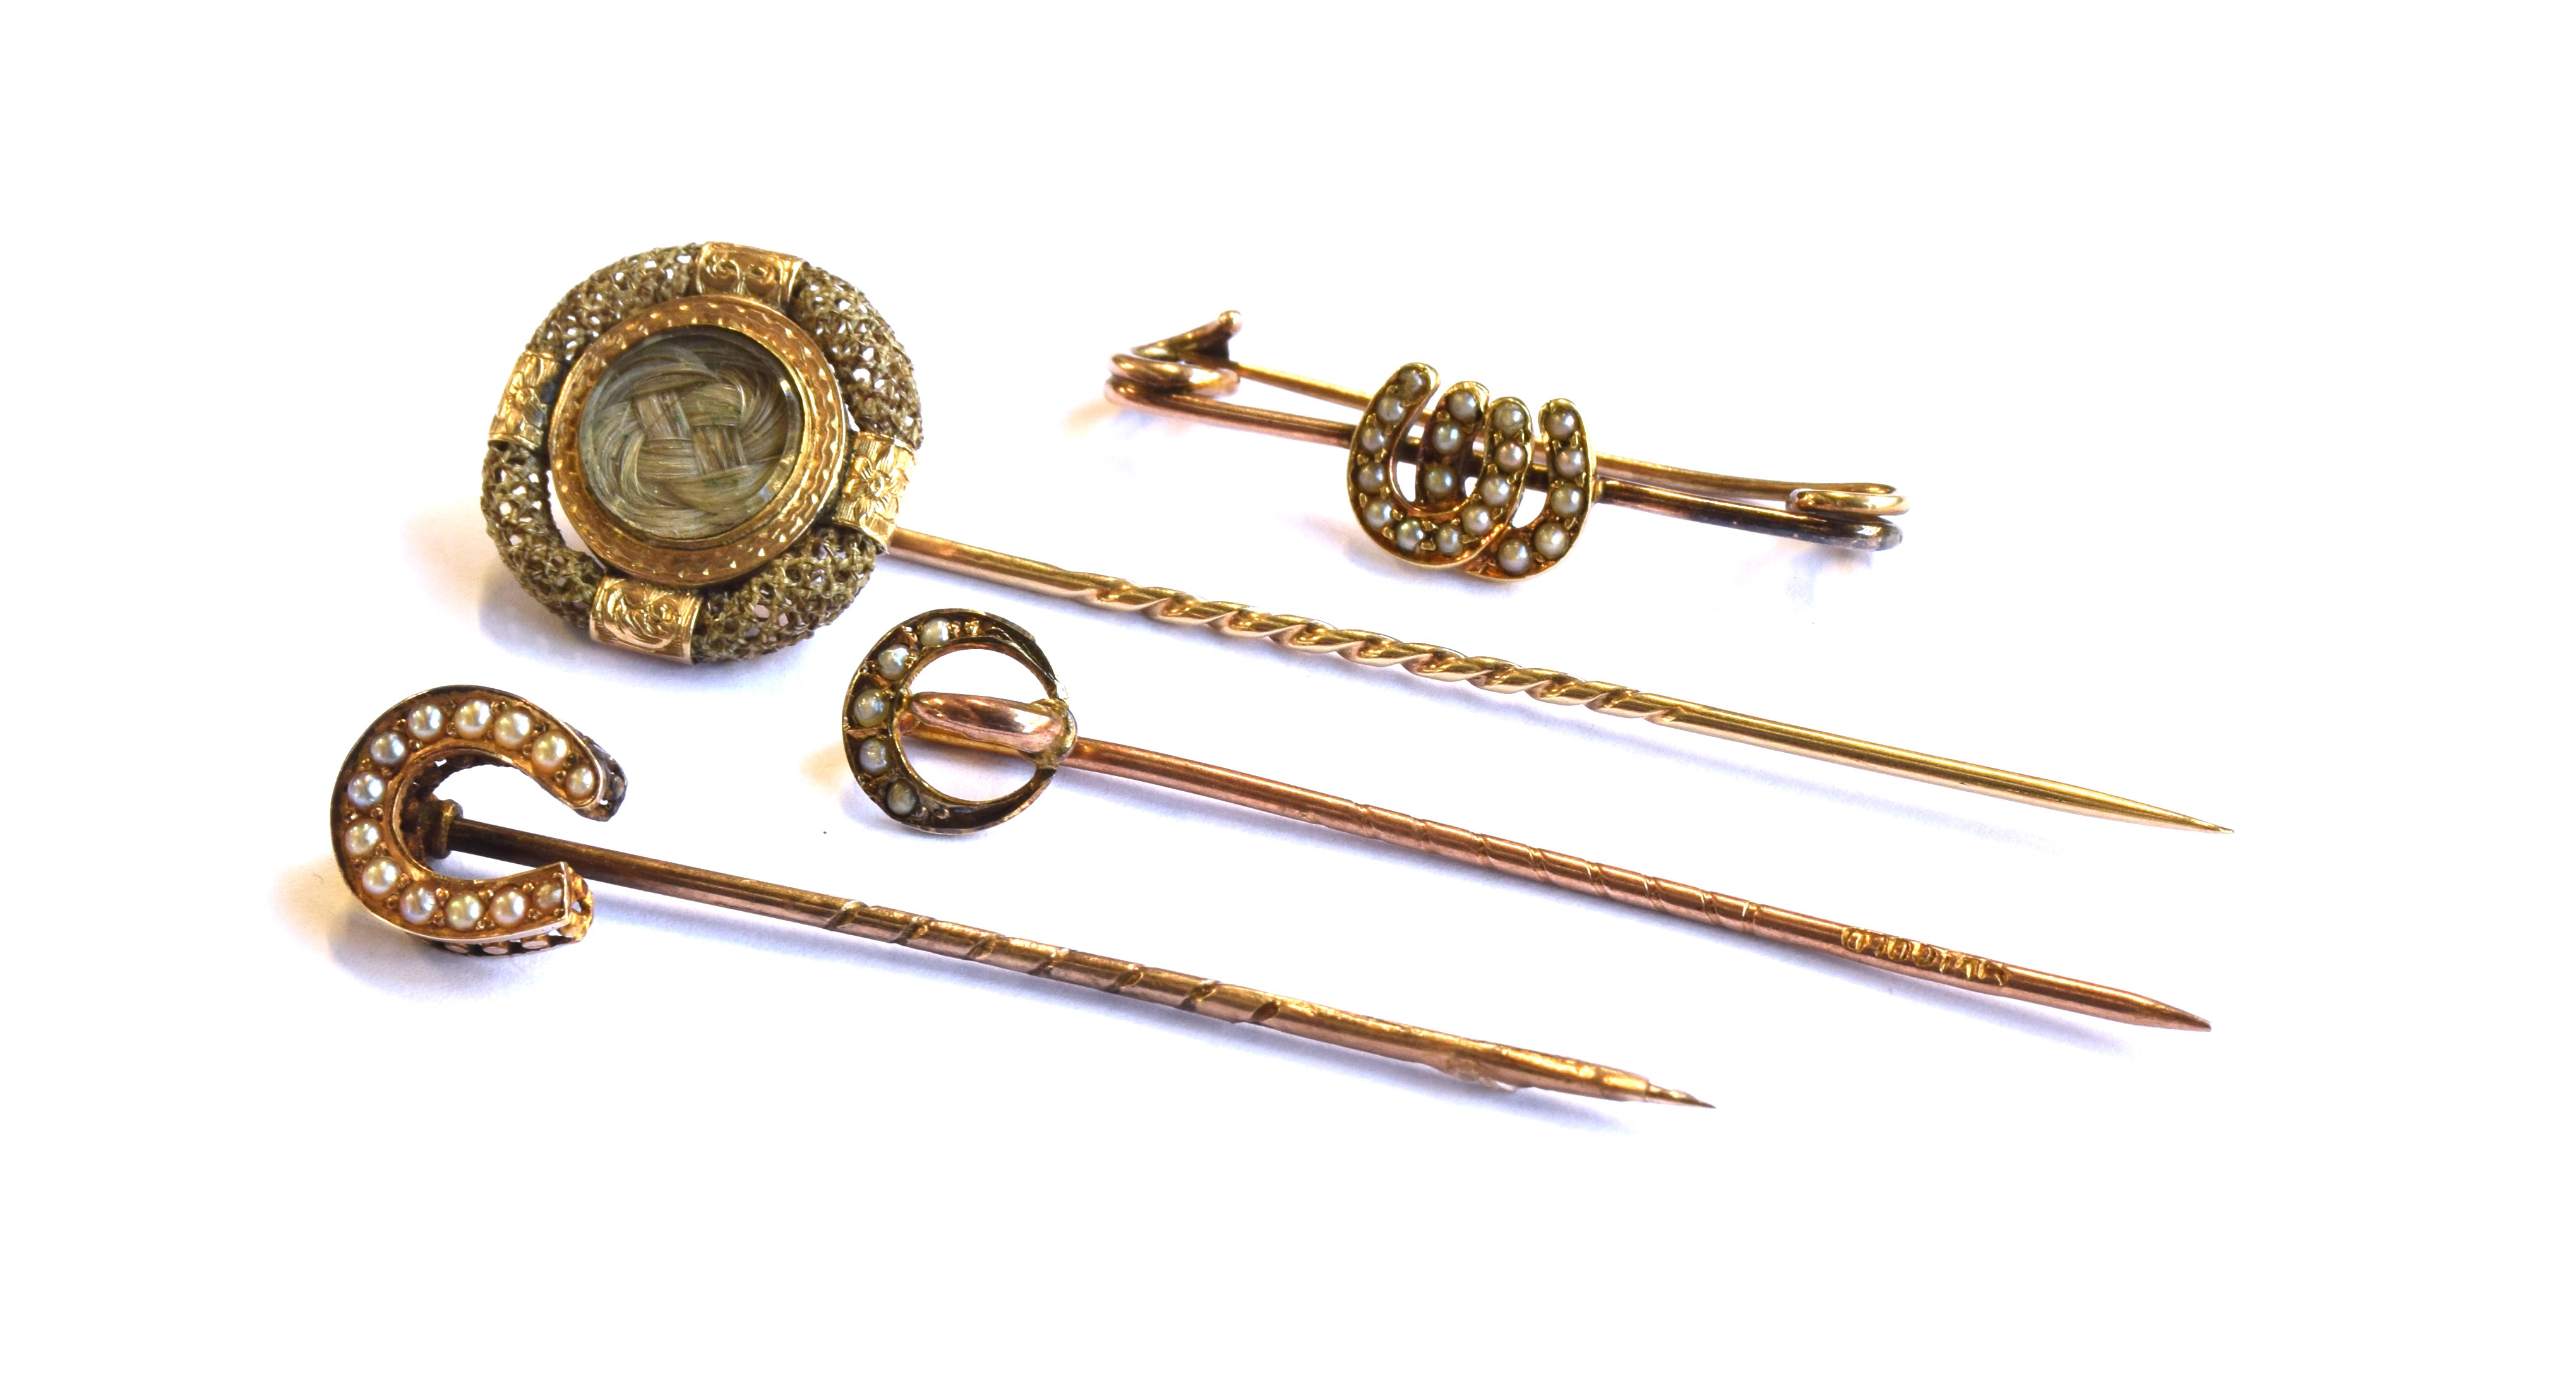 A gold mounted Victorian hair work stick pin, the glazed compartment having plaited hair, surrounded